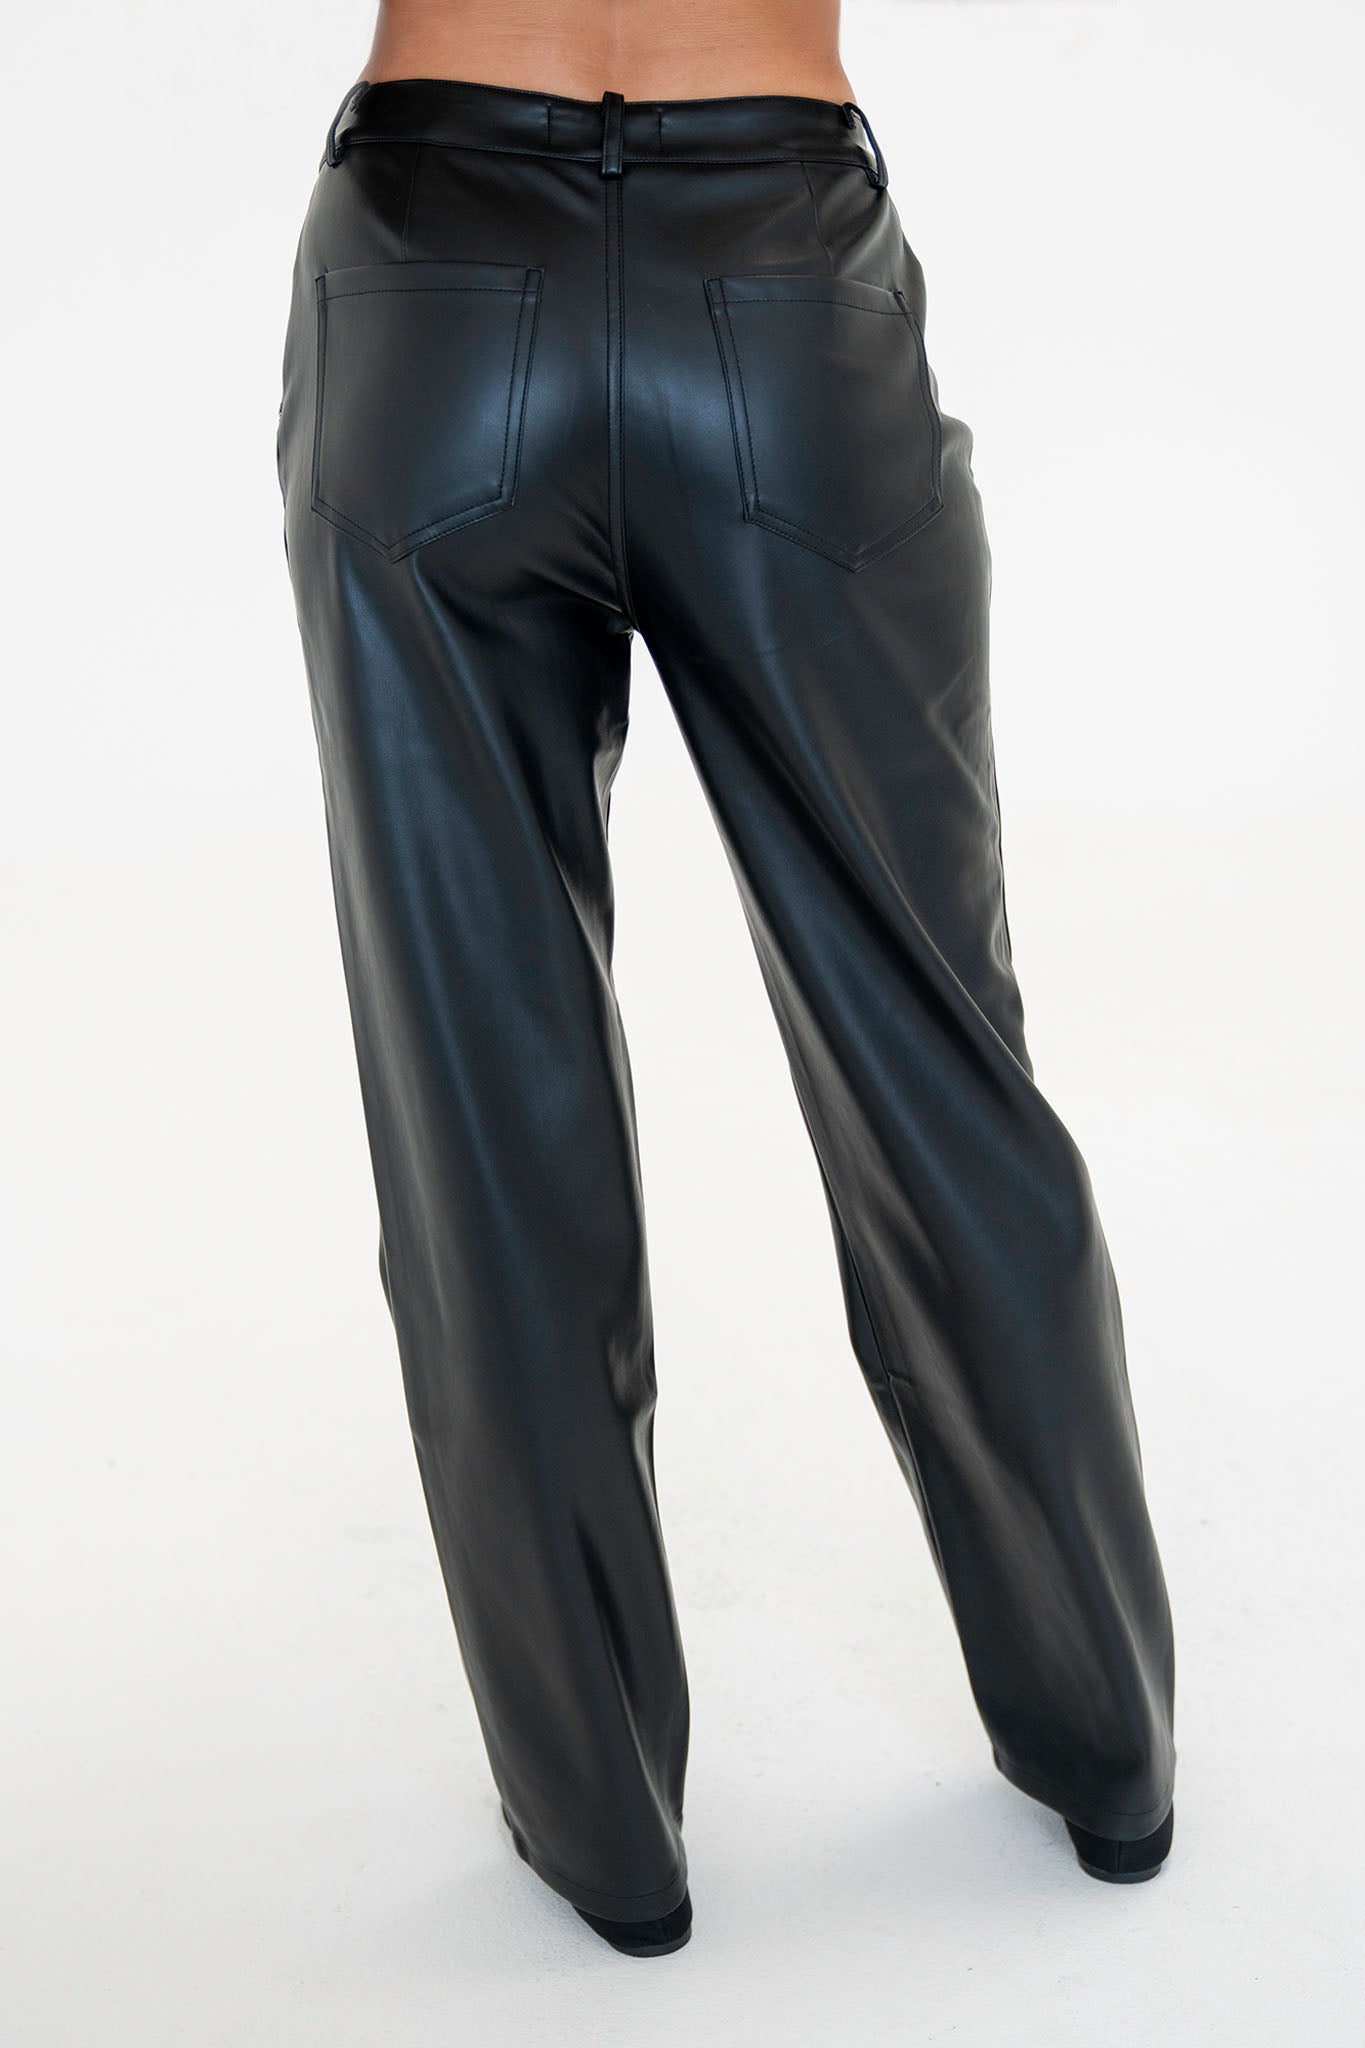 View 4 of Raywood Straight Leg Vegan Leather Pants, a Pants from Larrea Cove. Detail: .